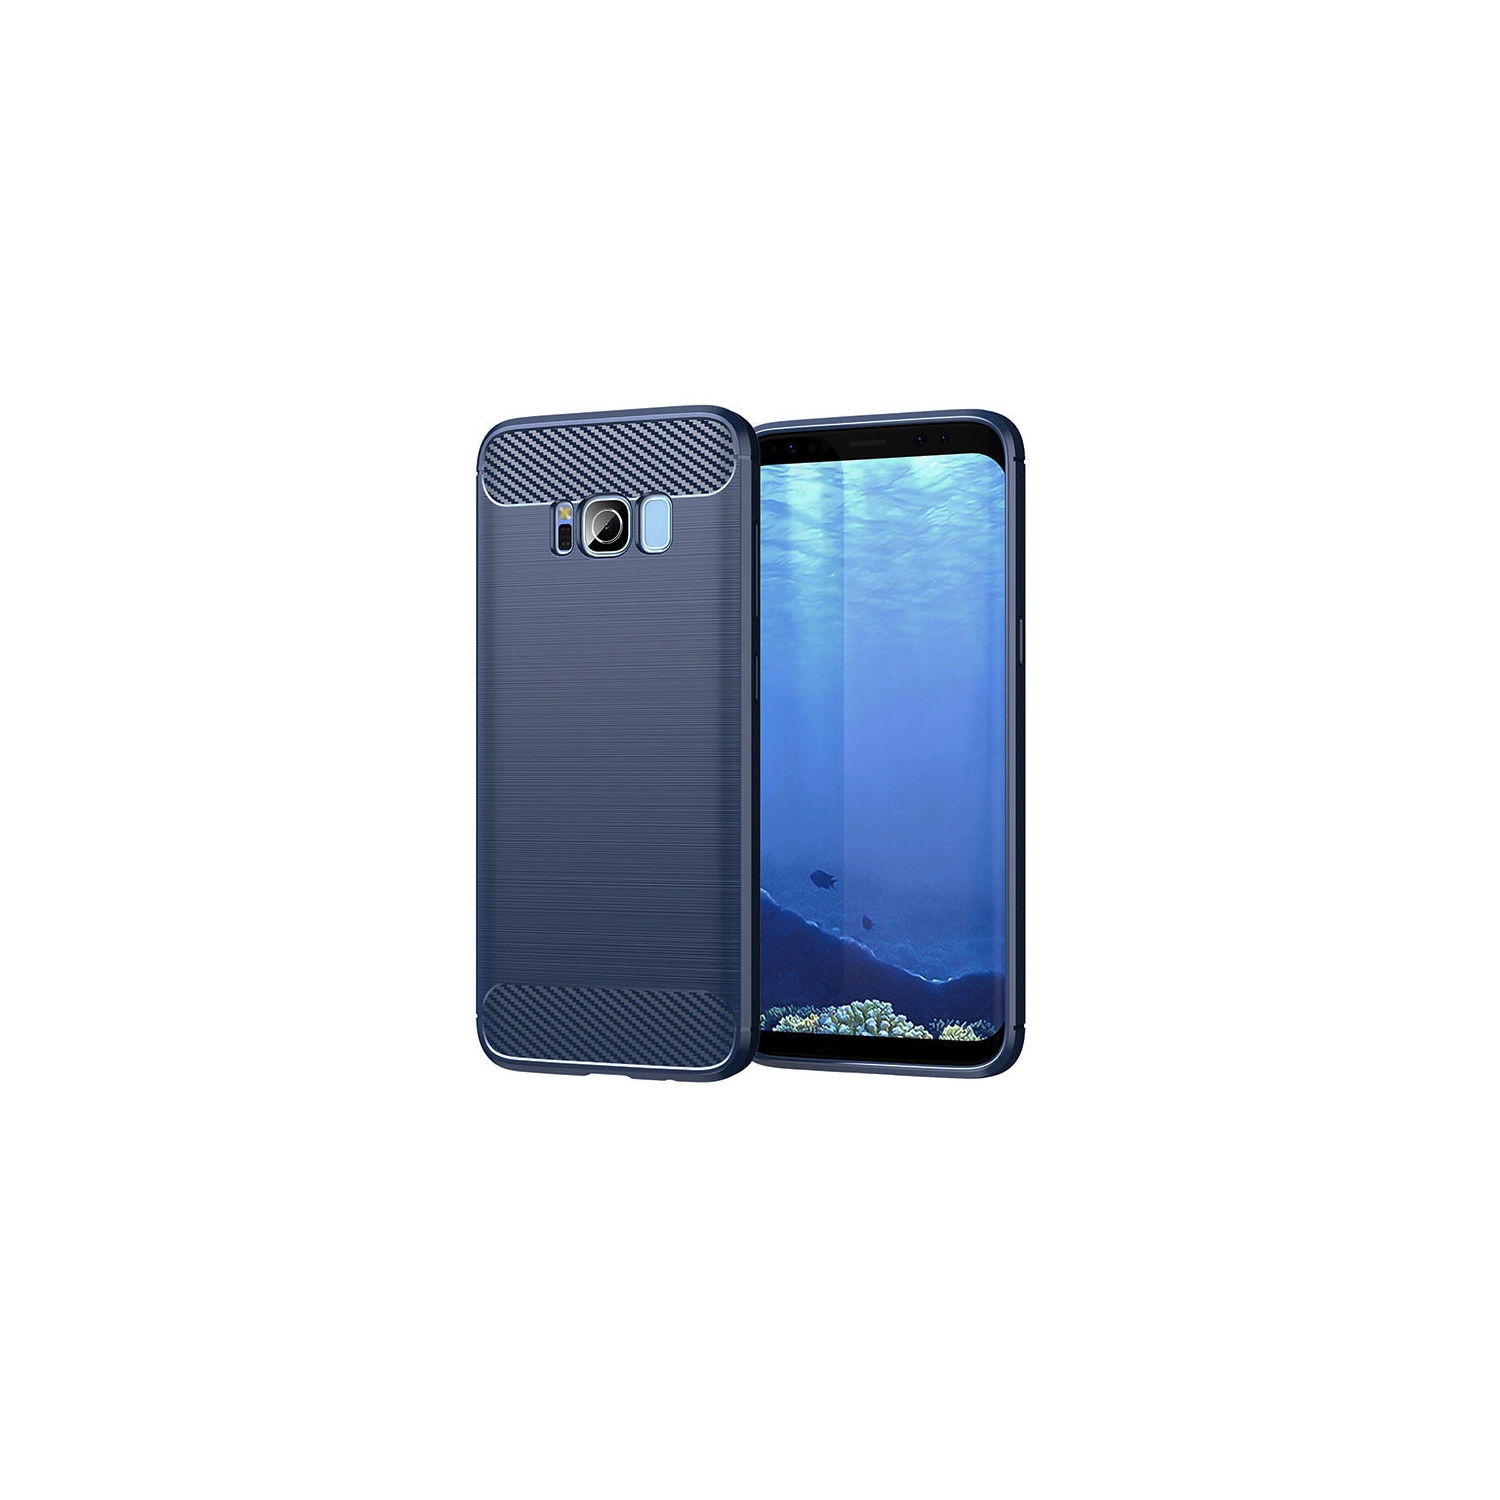 PANDACO Navy Brushed Metal Case for Samsung Galaxy S8+